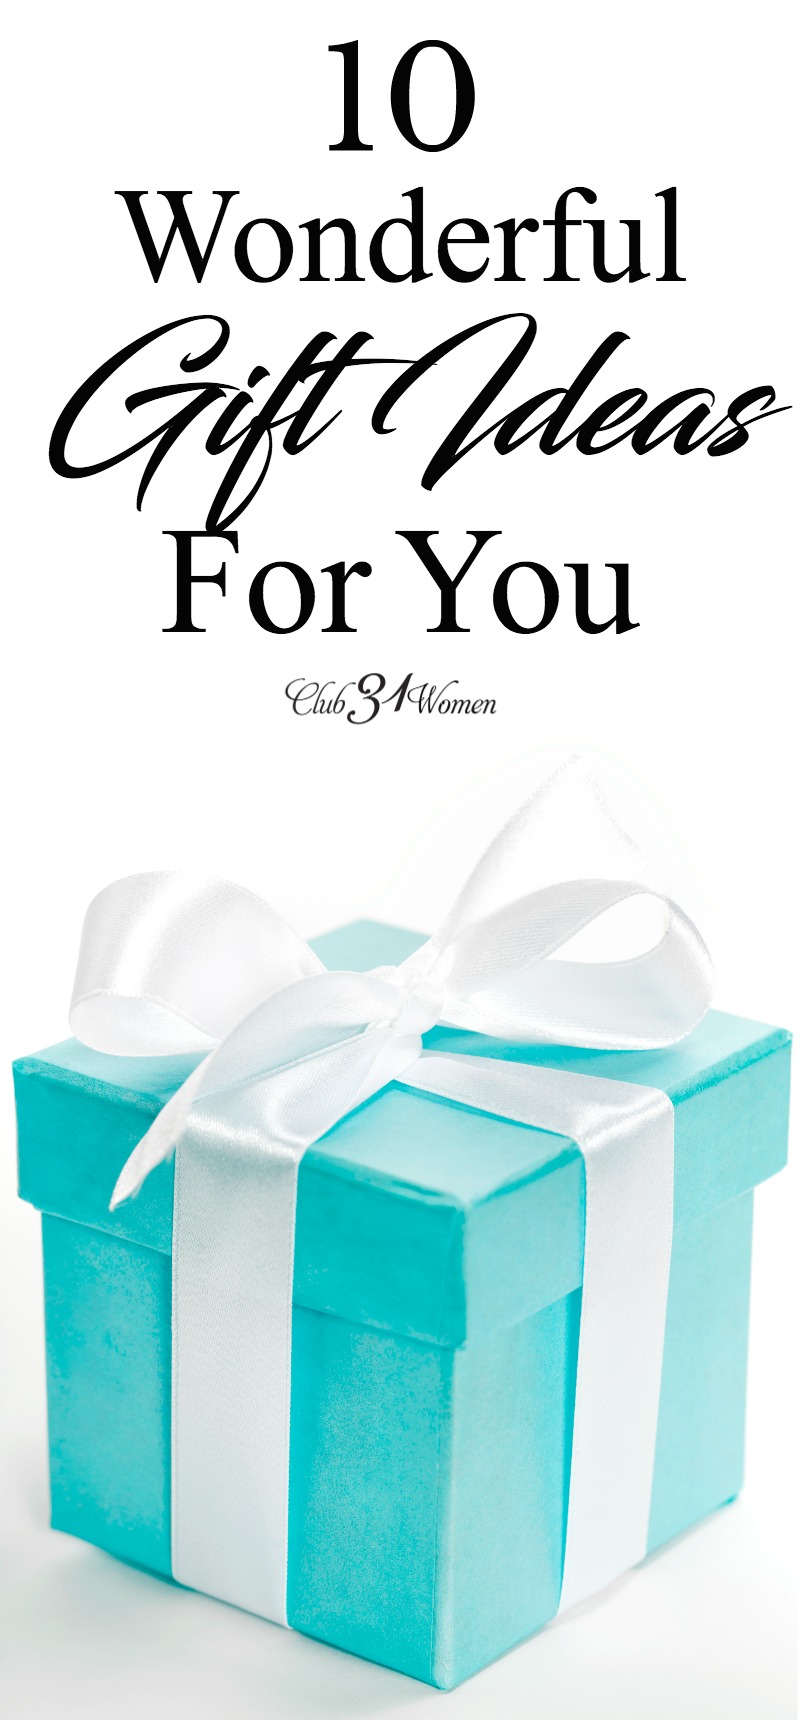 If you're looking for some wonderful gift ideas for those special friends or family members, I hope you'll find this a fantastic place to start!! via @Club31Women